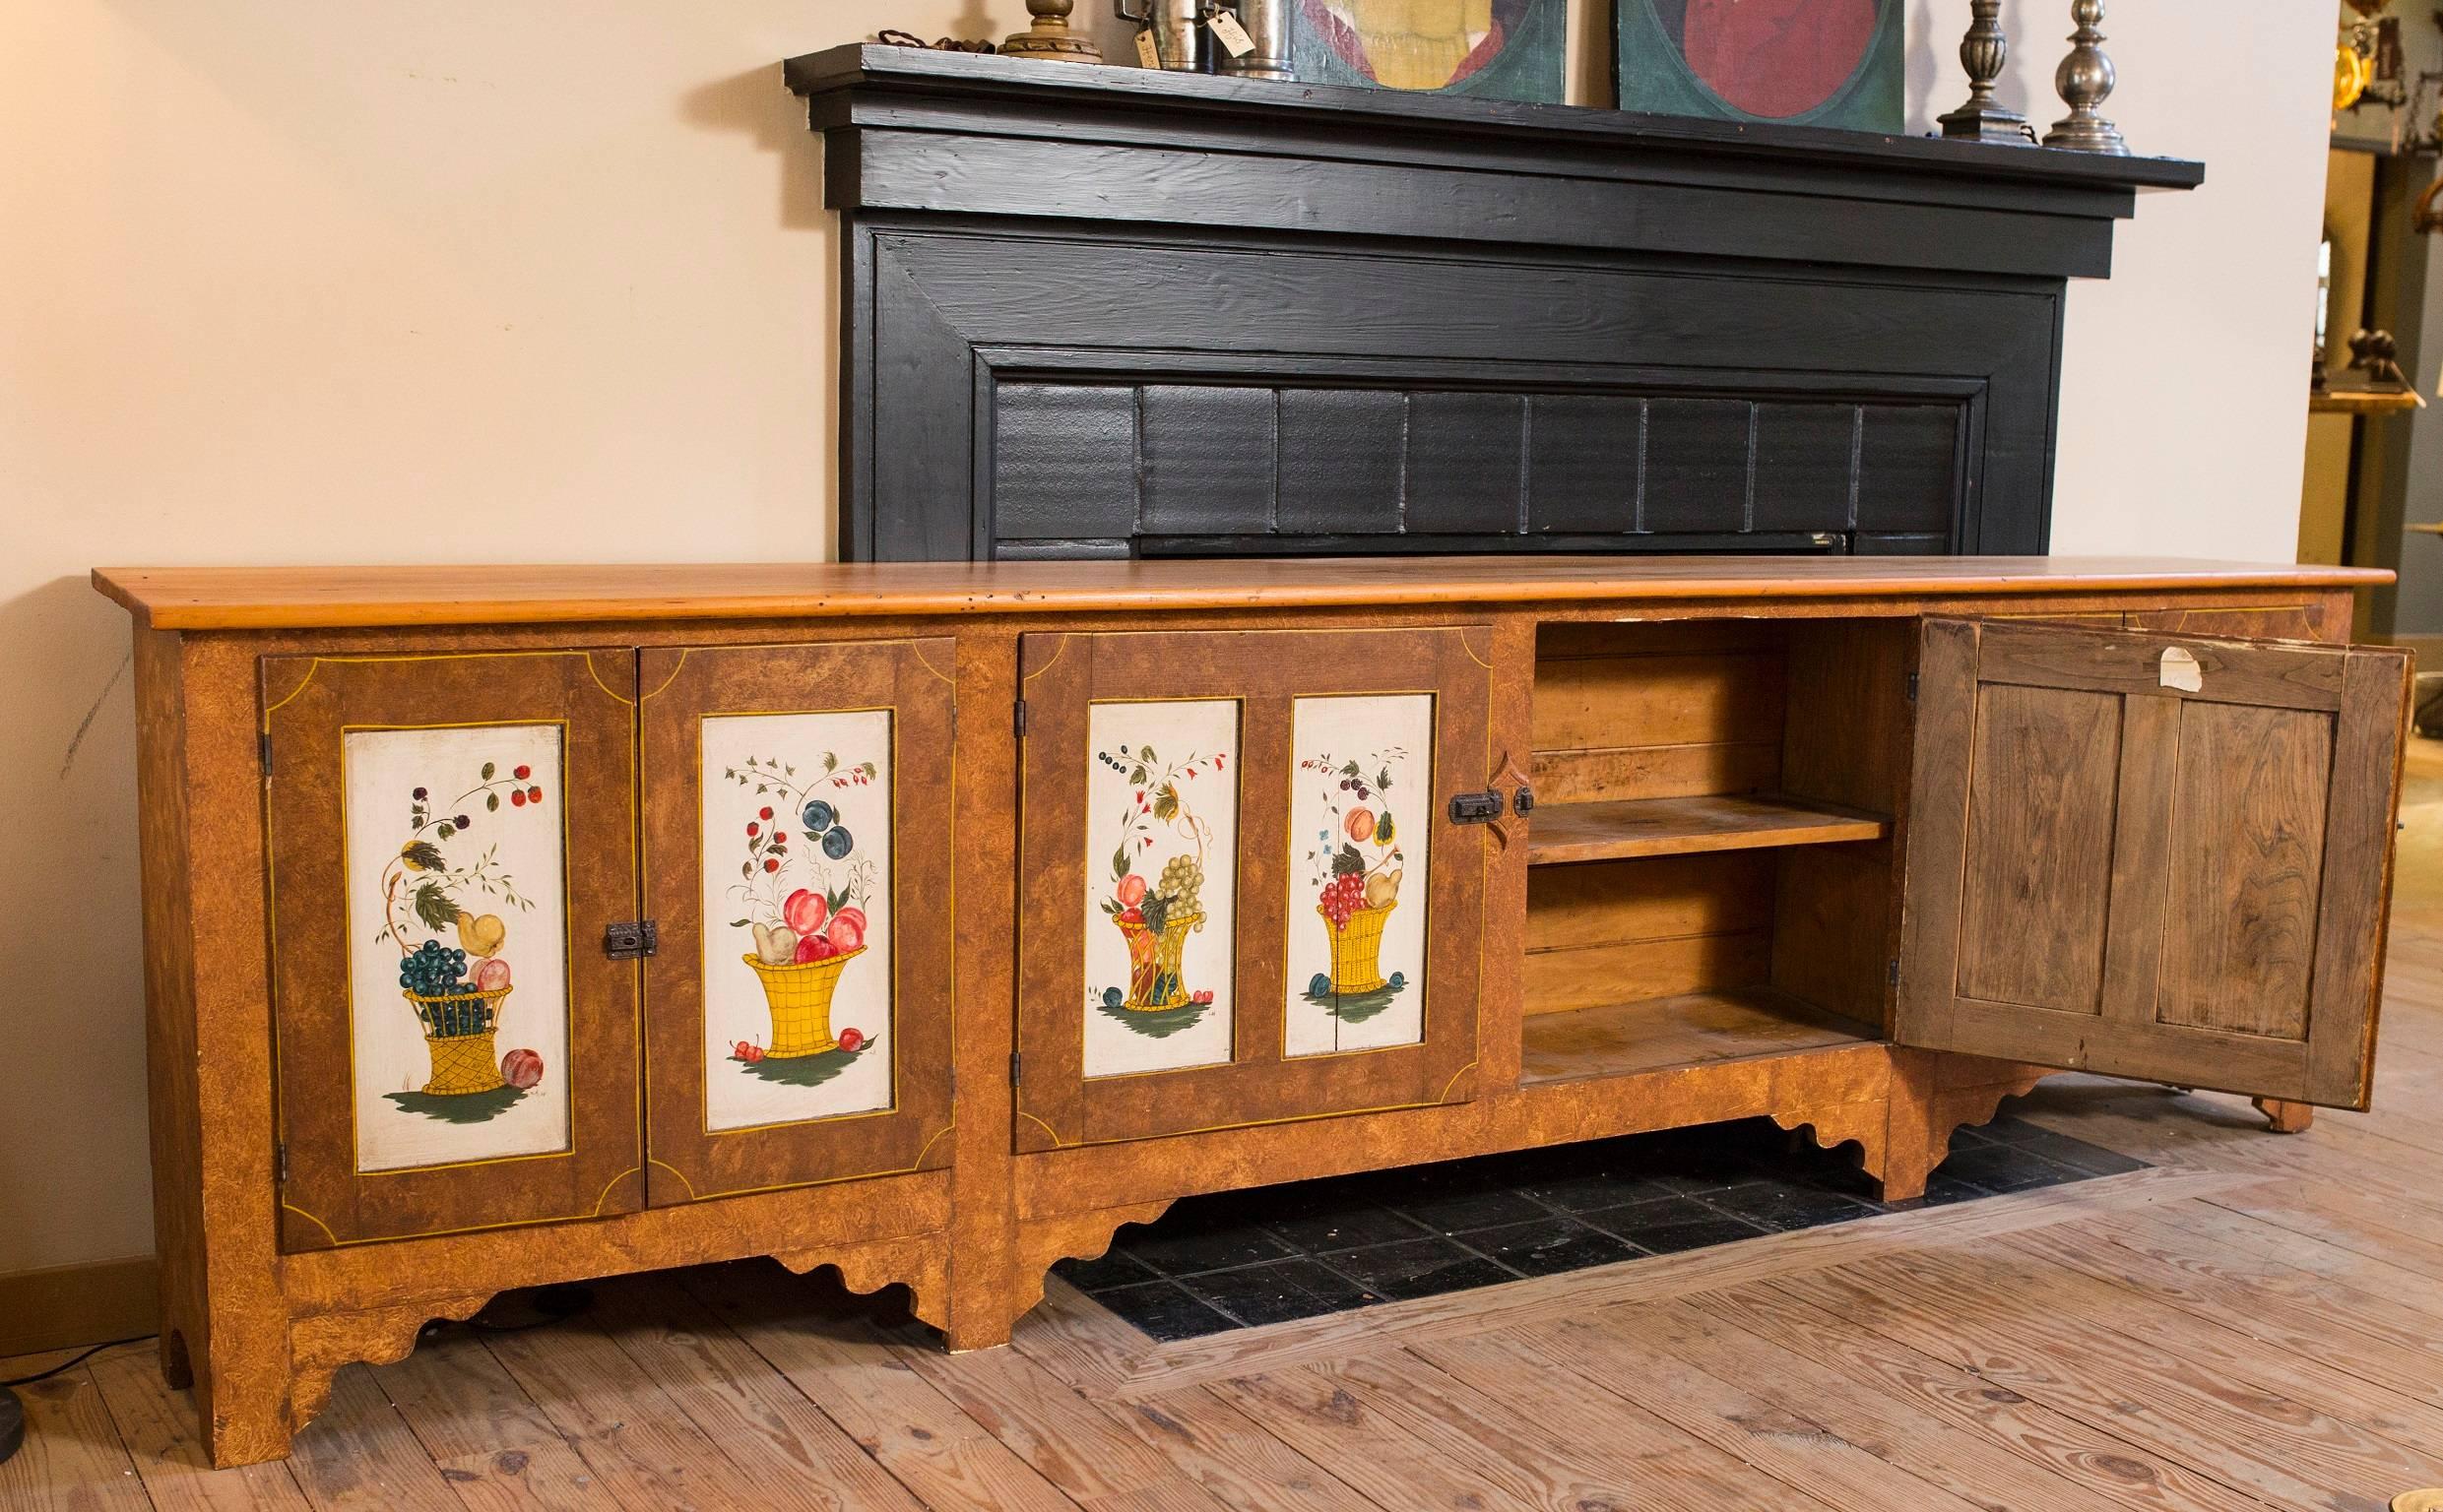 Faux wood grain painted on front and sides with fruit and floral basket theme on doors. Antique furniture piece. Commissioned and hand-painted by American artist Lew Hudnall. Signed and dated 1974. Middle section is wider inside than outermost